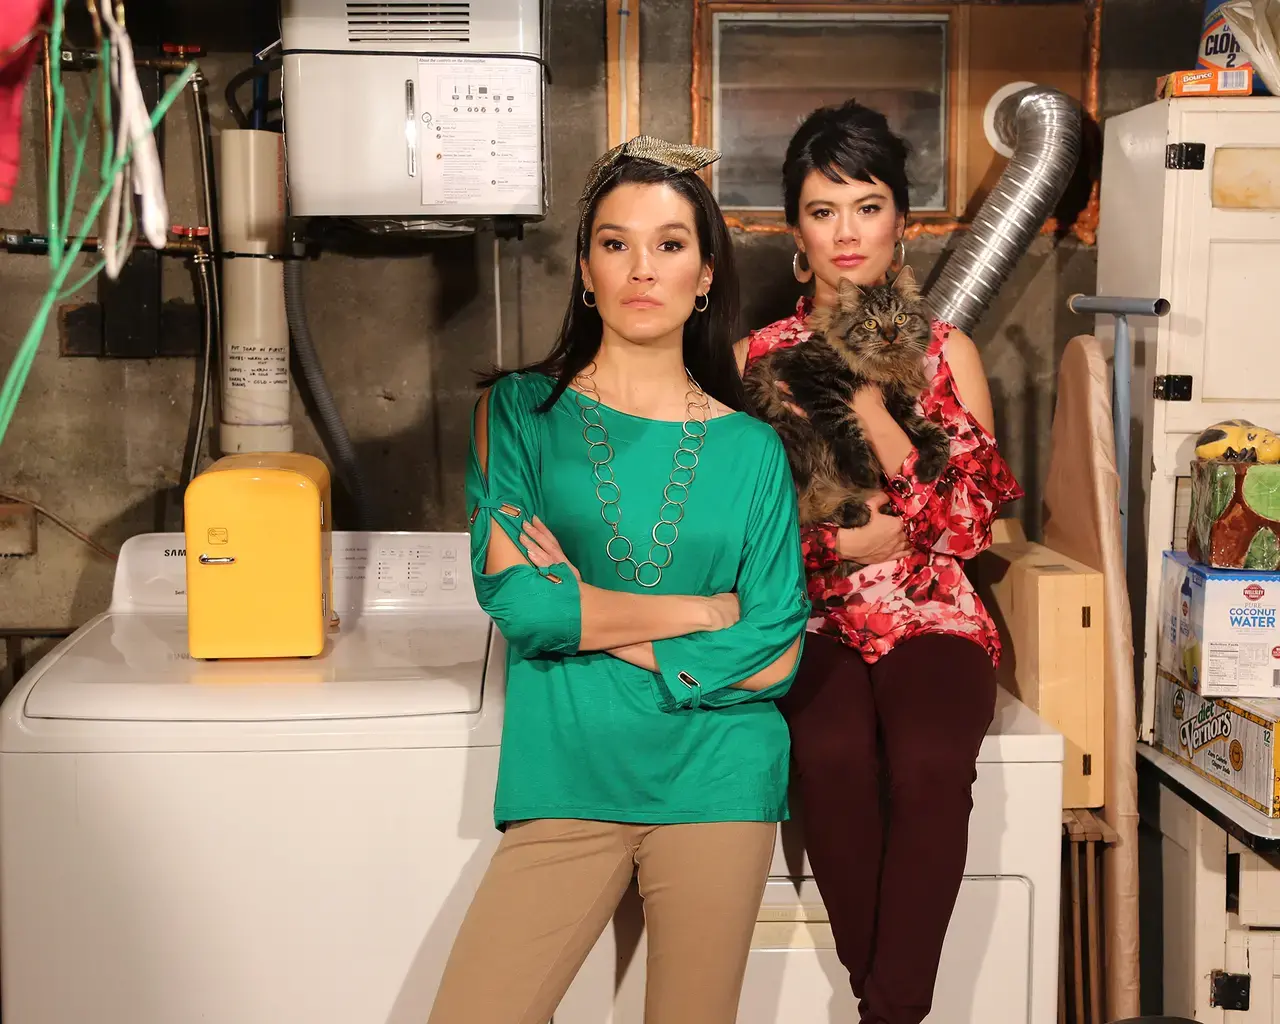 Pew Fellow Maia Chao, still from Gently Used&nbsp;video series on Provincetown Community Television, 2018. Pictured: Maia Chao and Zoë Chao.&nbsp;